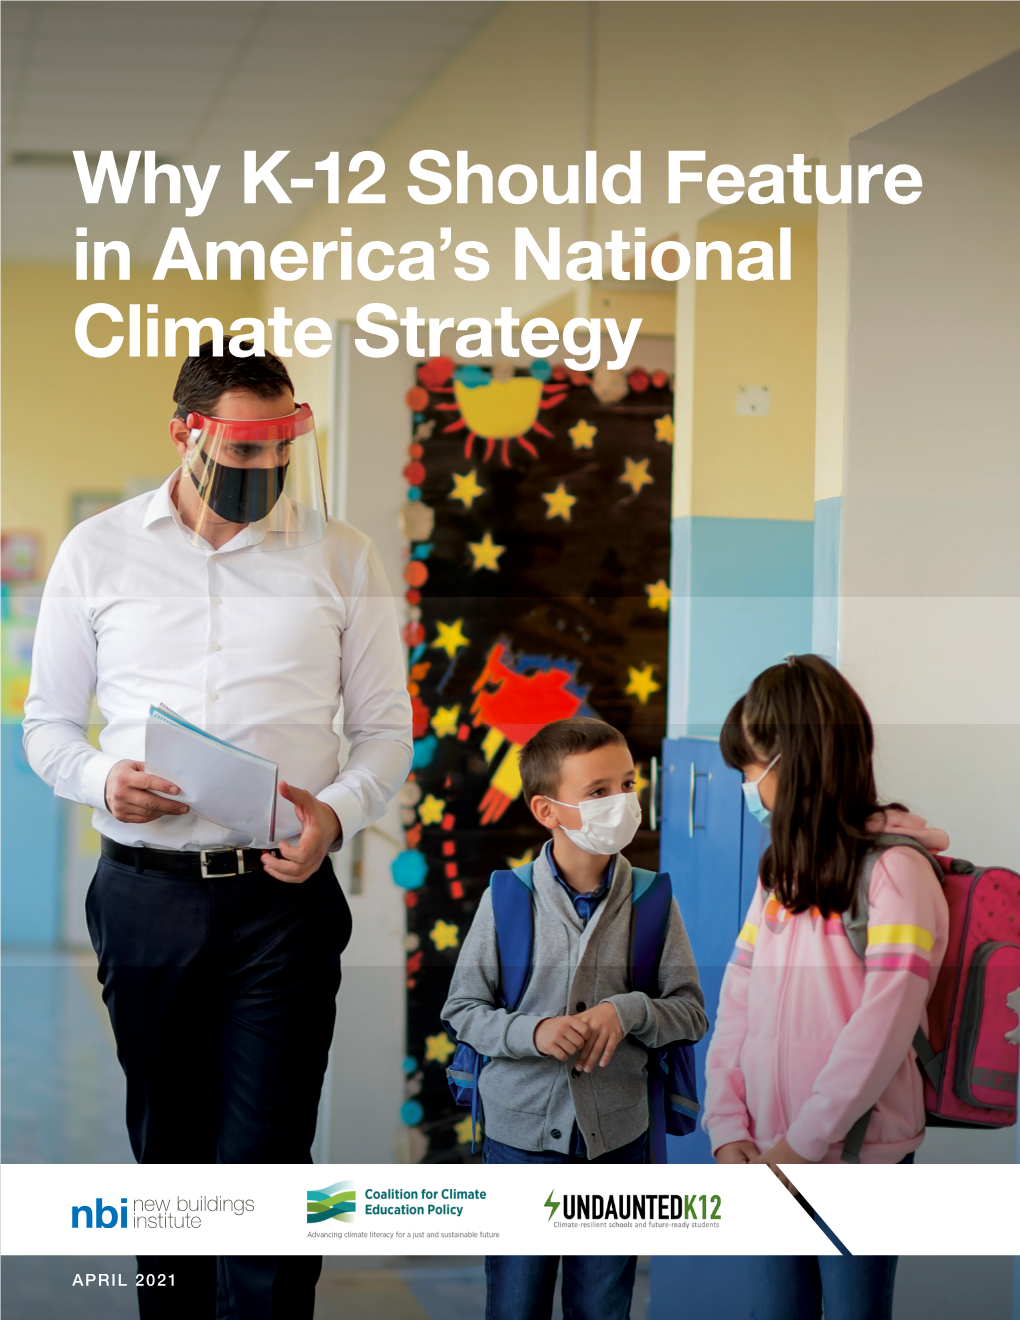 Why K-12 Should Feature in America's National Climate Strategy